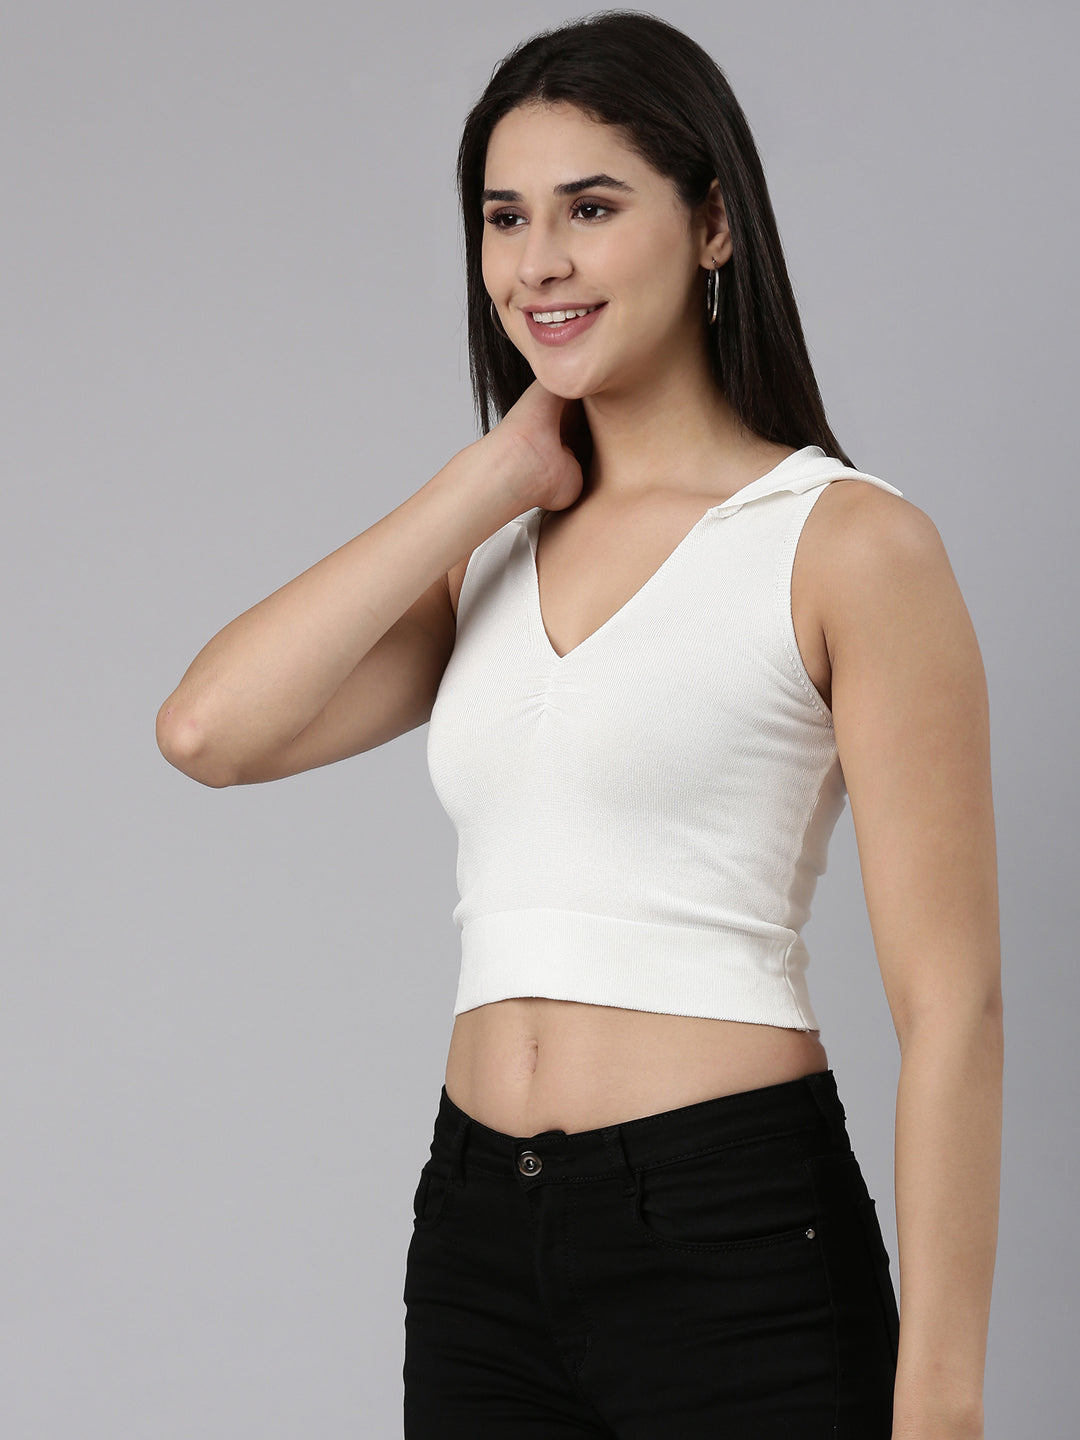 Above the Keyboard Collar Solid White Fitted Crop Top